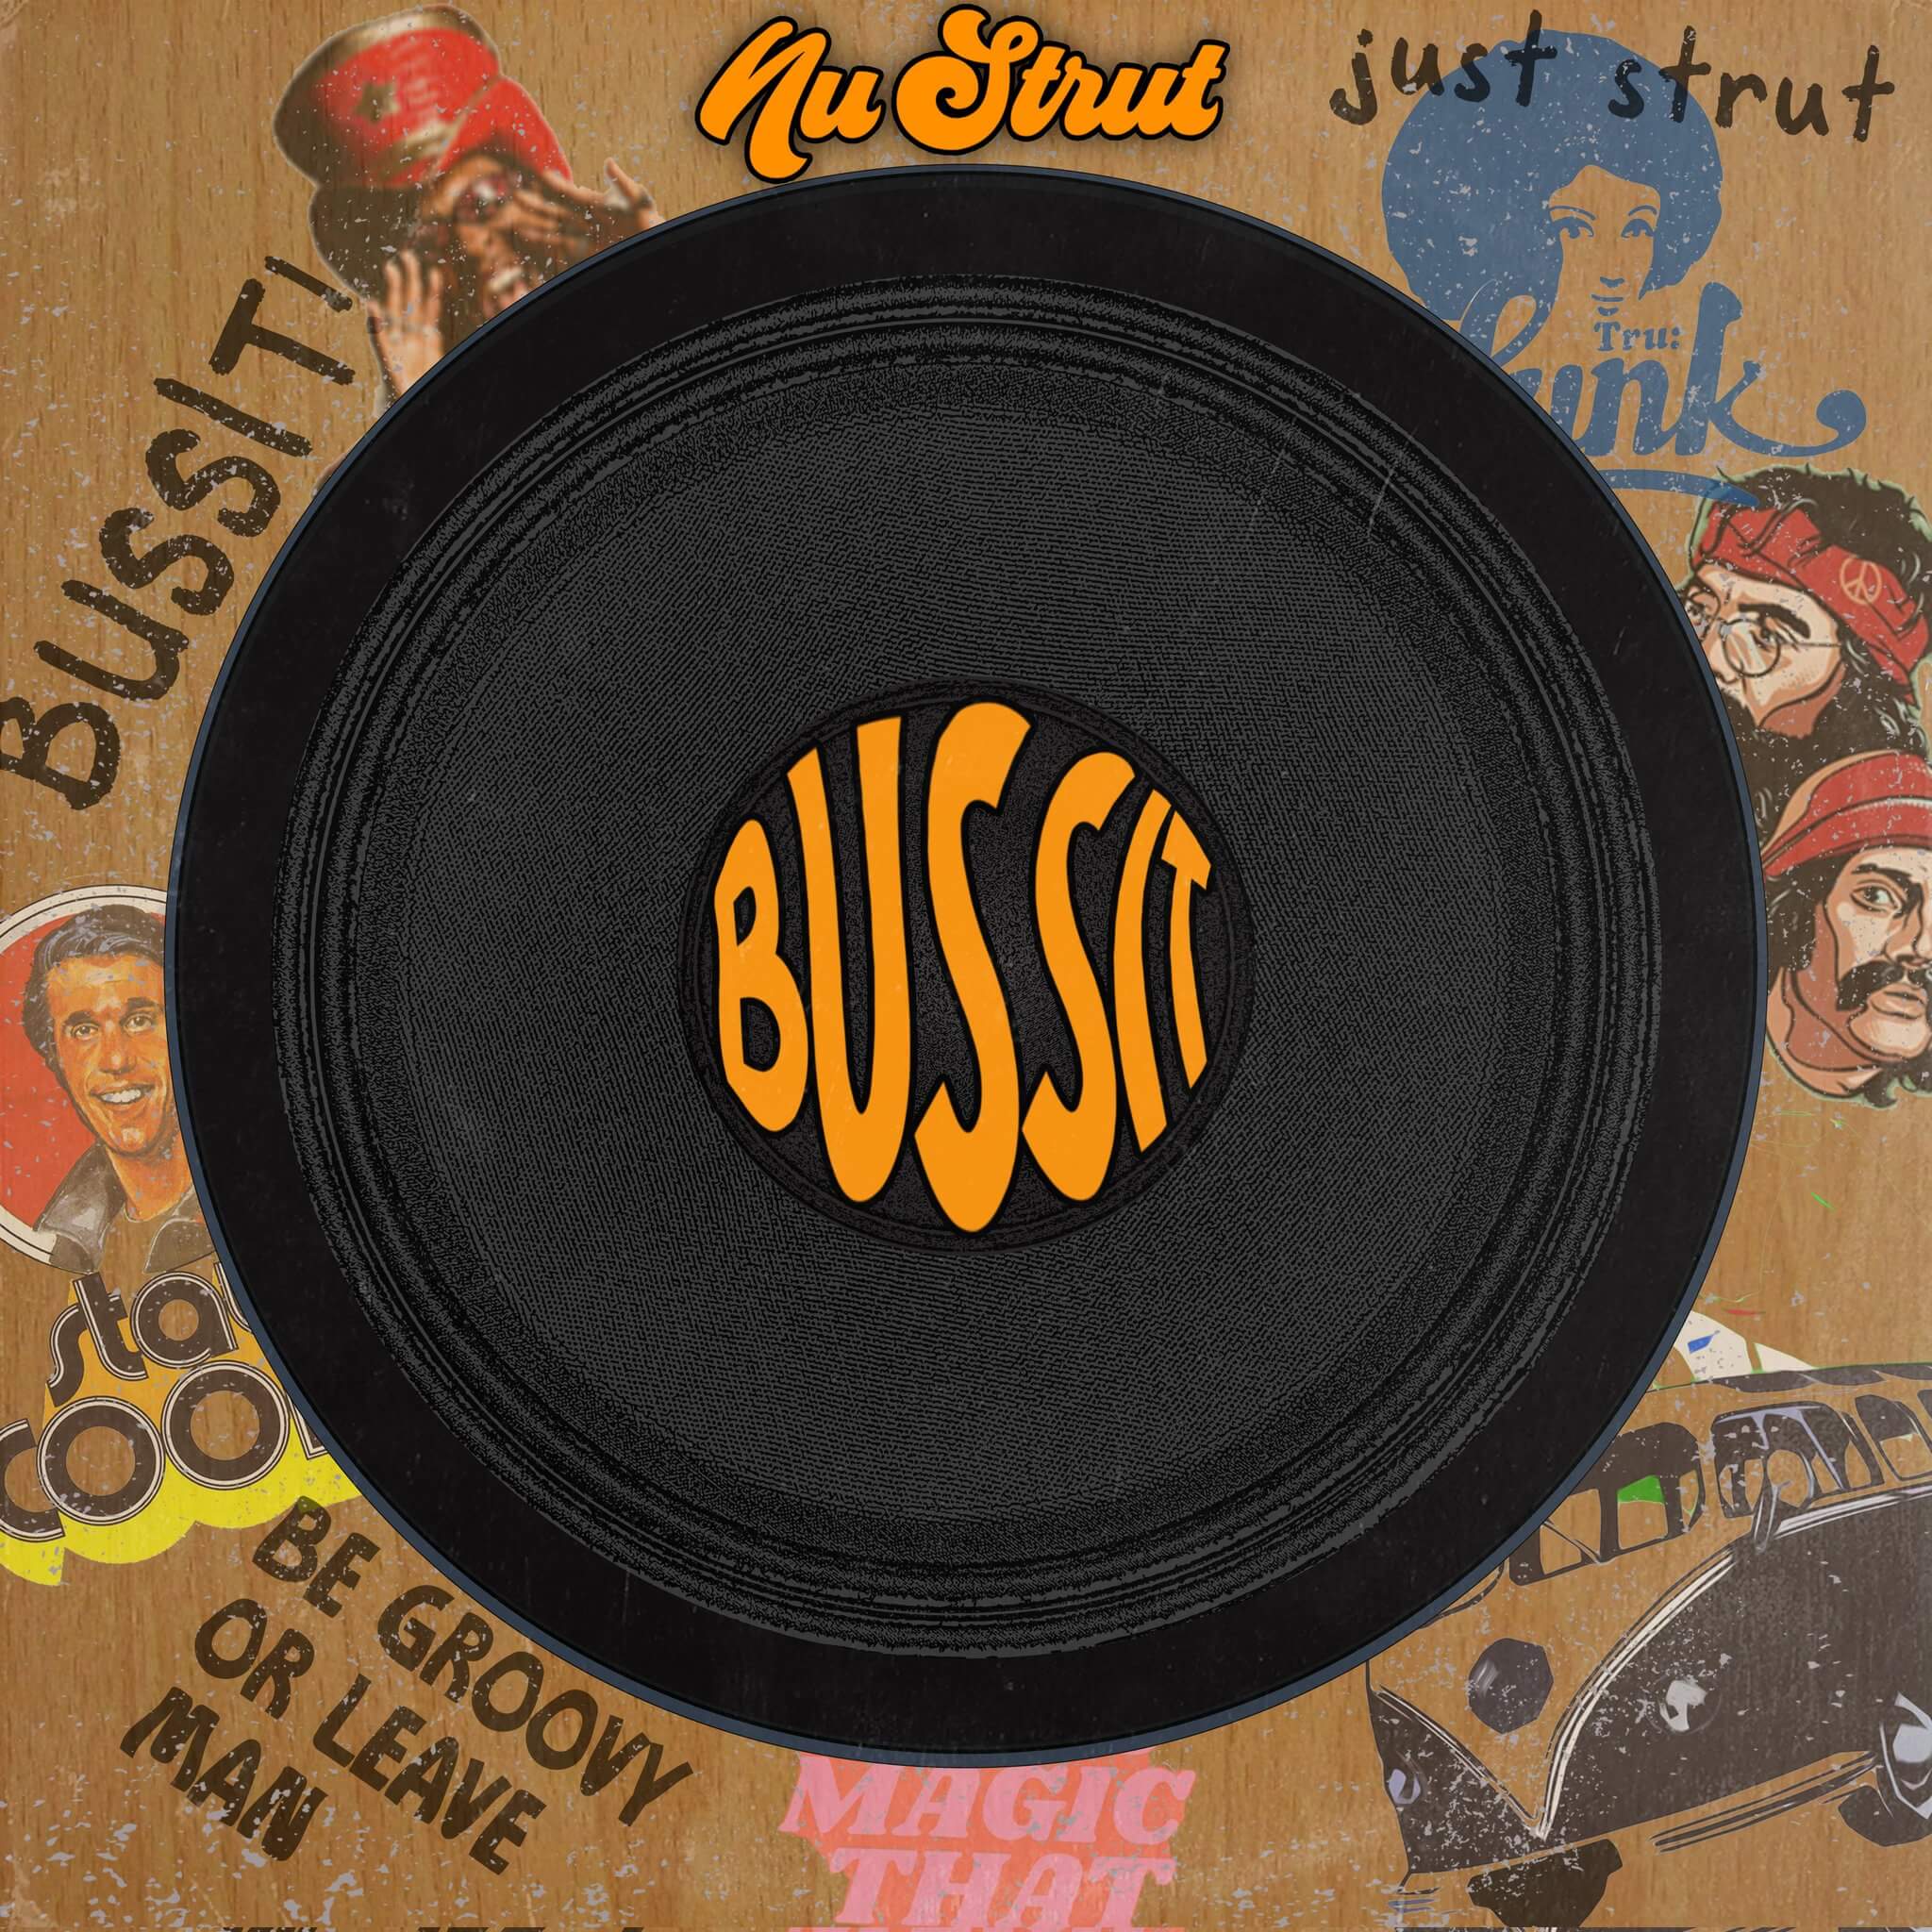 ‘BUSSIT’ Down With Nu Strut’s Groovy New Tune